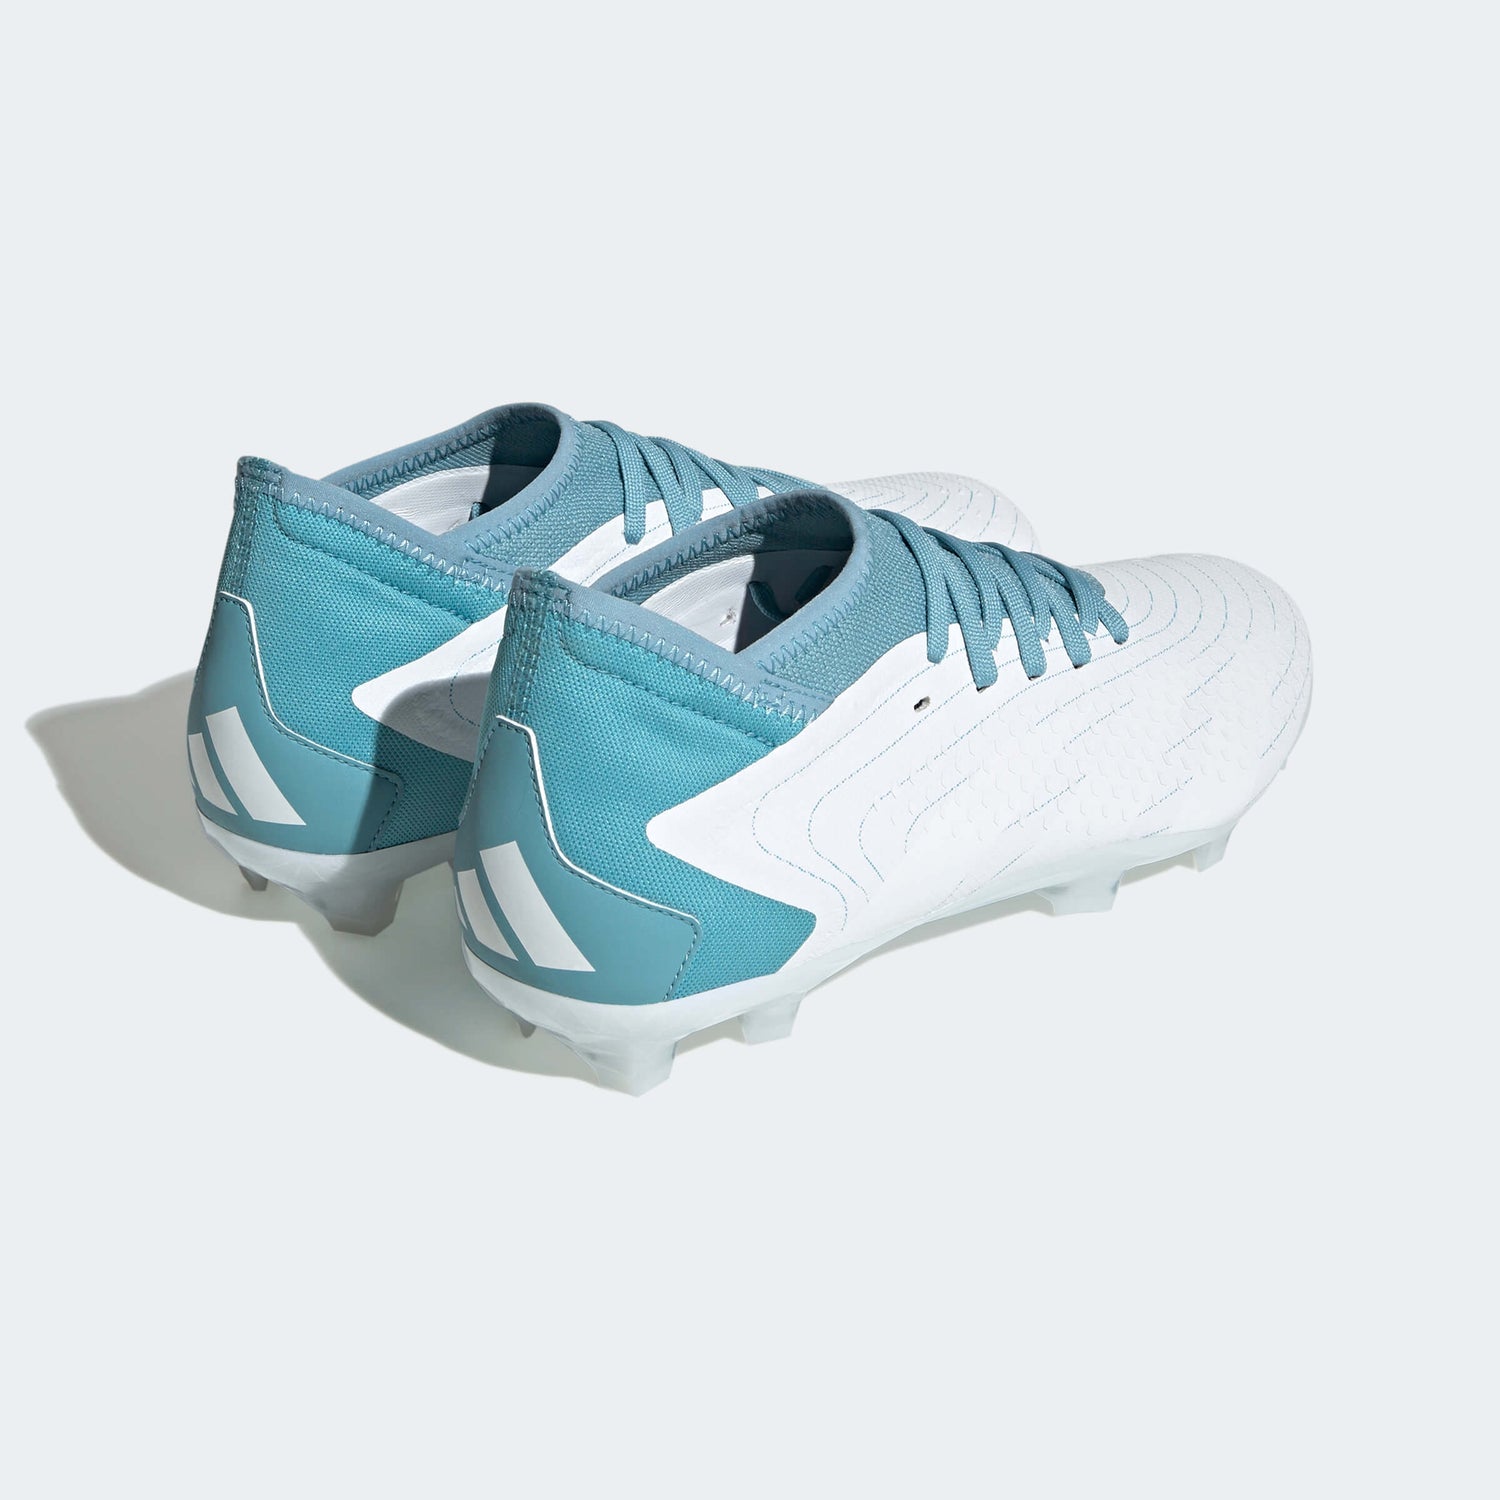 adidas Predator Accuracy.3 FG - Parley Pack (SP23) (Pair - Back Lateral)